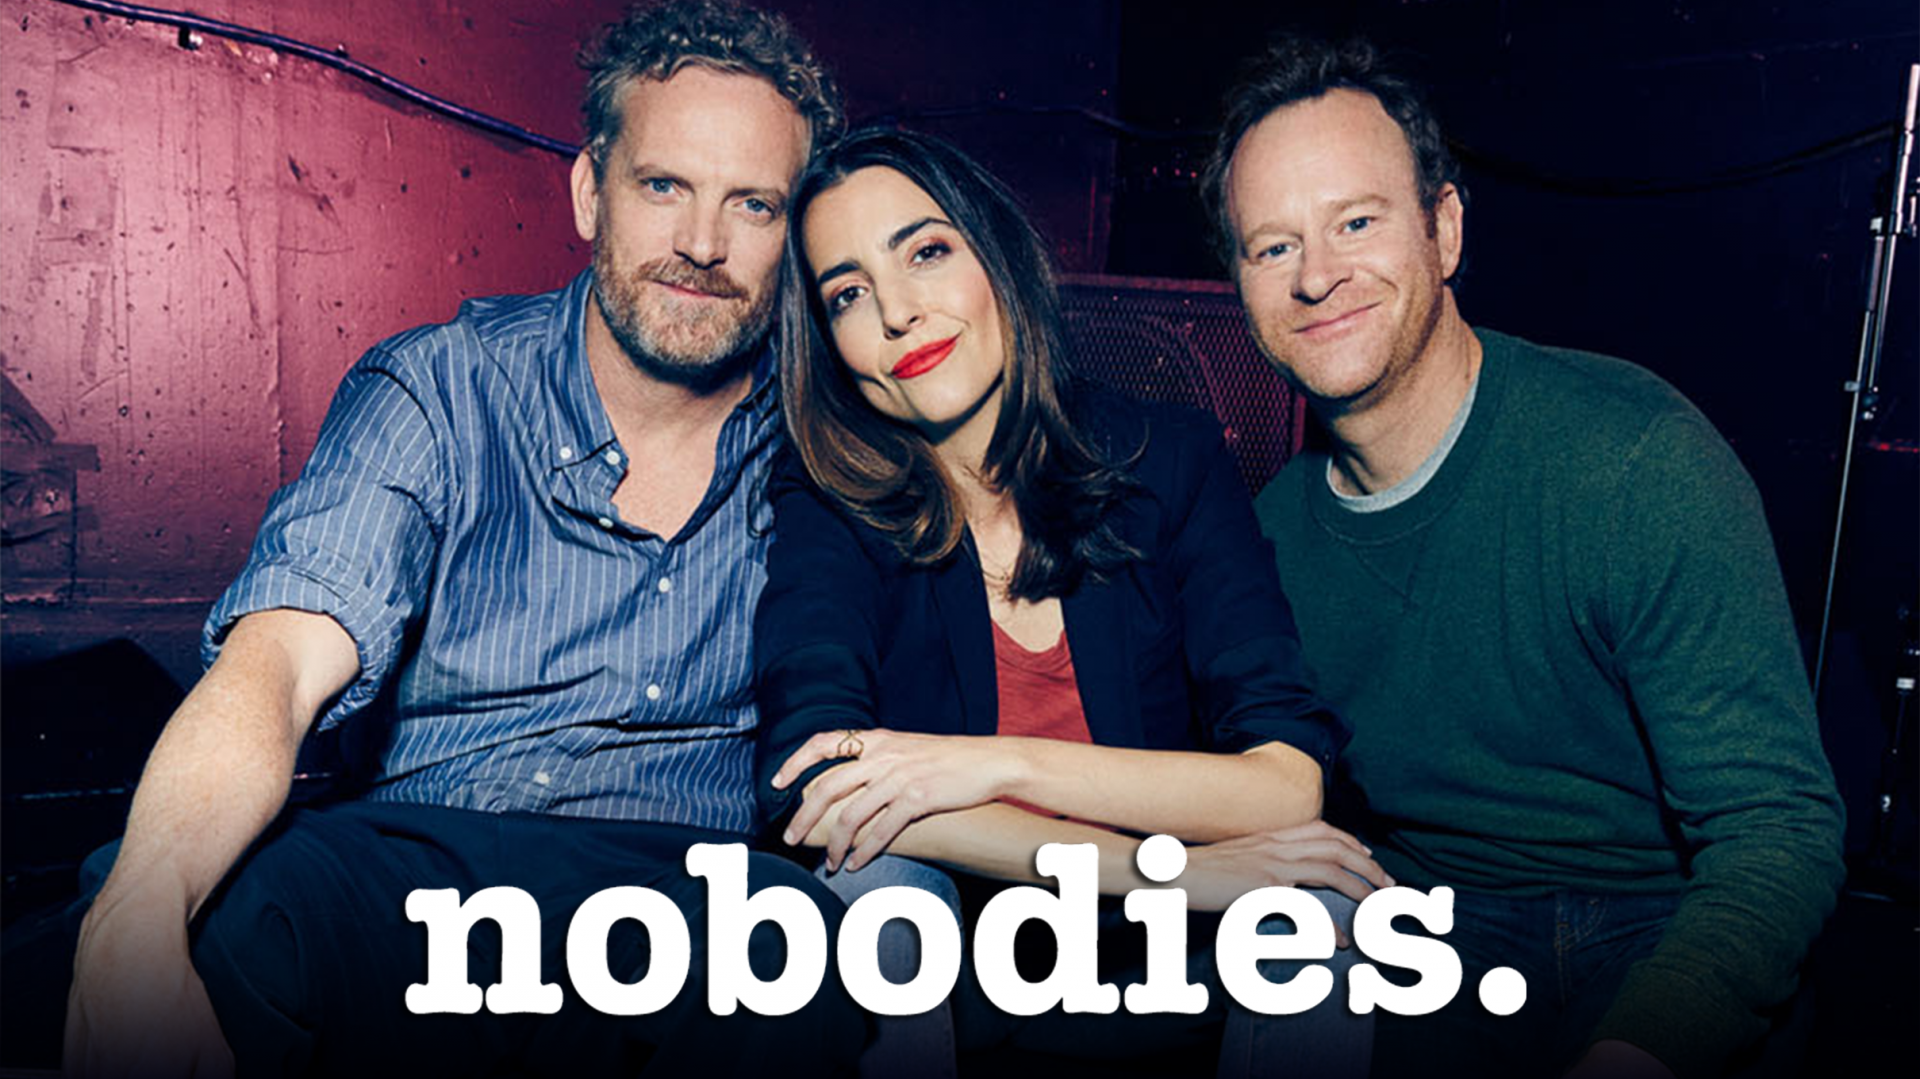 Nobodies is on Showmax